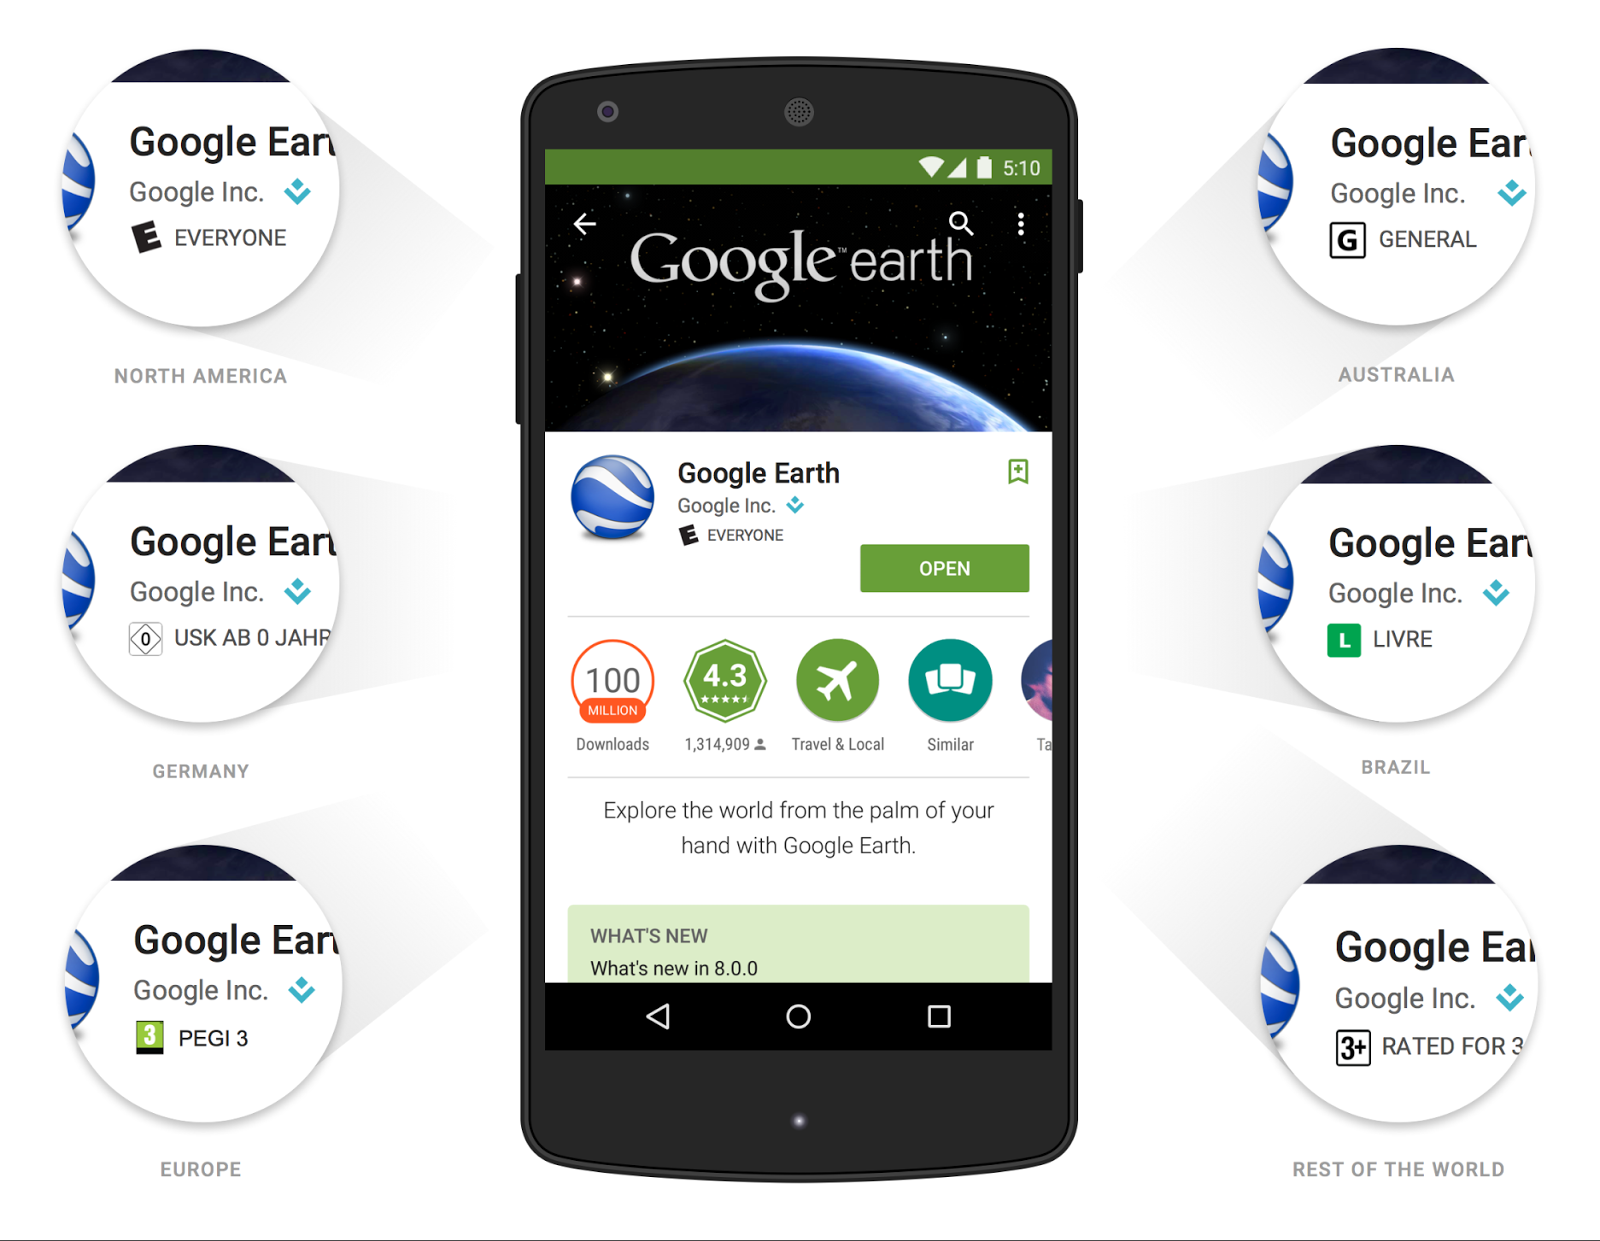 Google launches a new review and rating system for Play Store apps